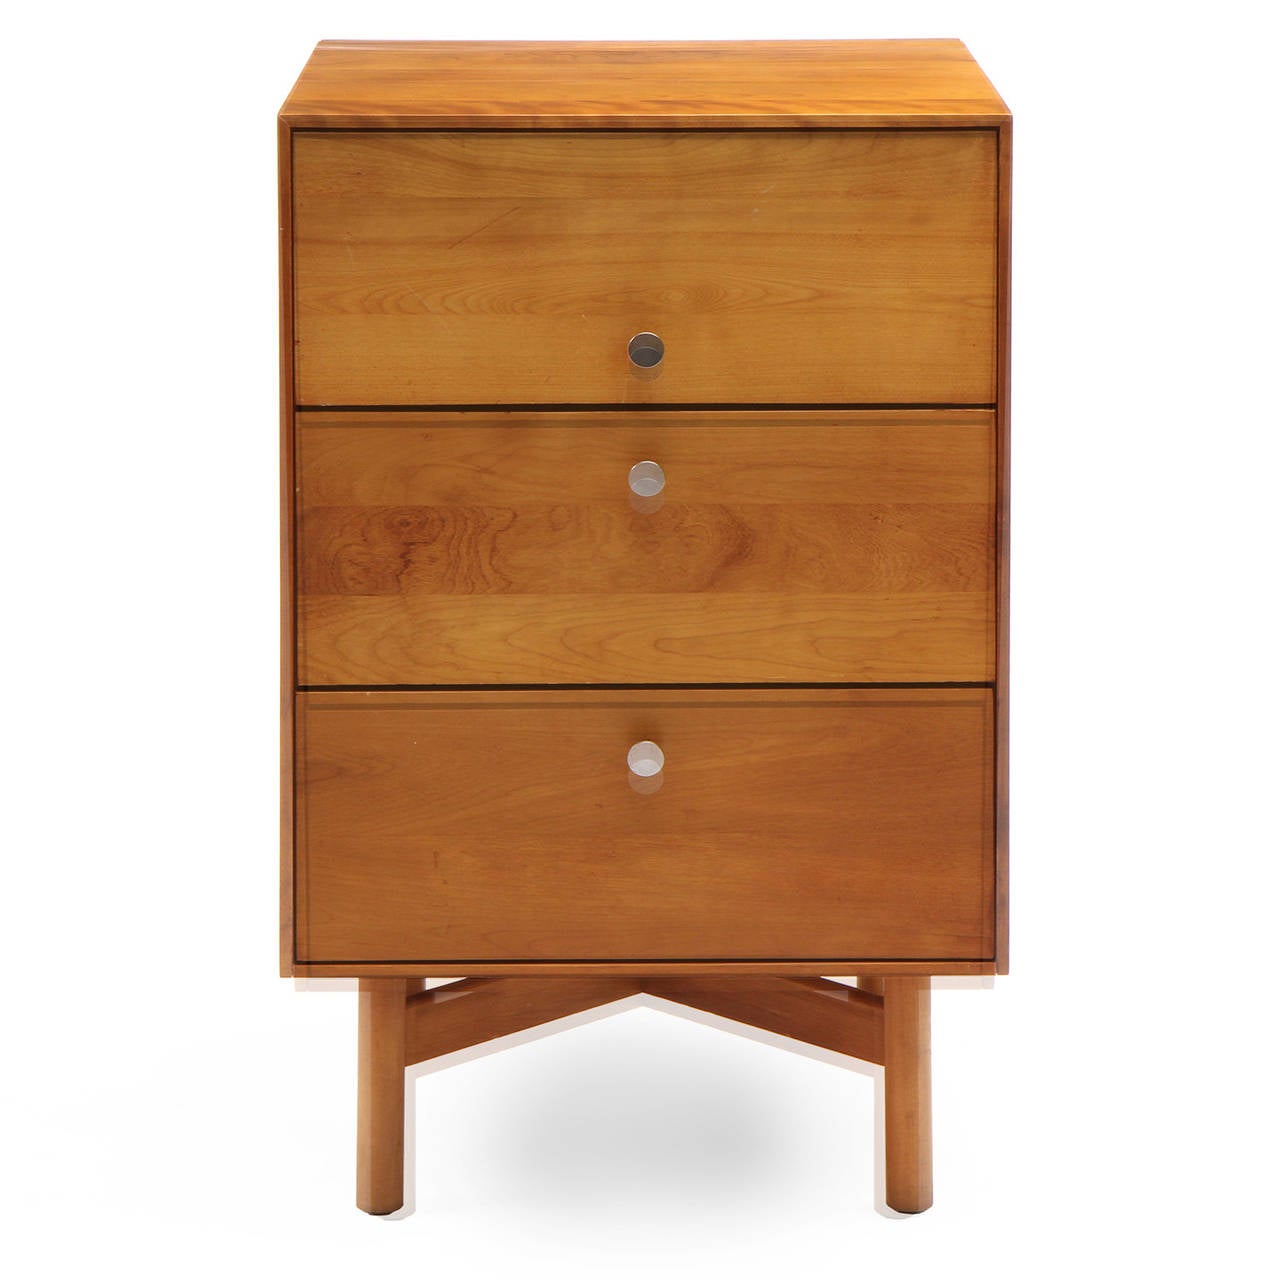 A narrow, spare and refined night stand having a thin-edged honey-toned birch rectilinear case with three drawers with brushed steel drawer pulls, floating on an x-braced architectural dowel leg base.